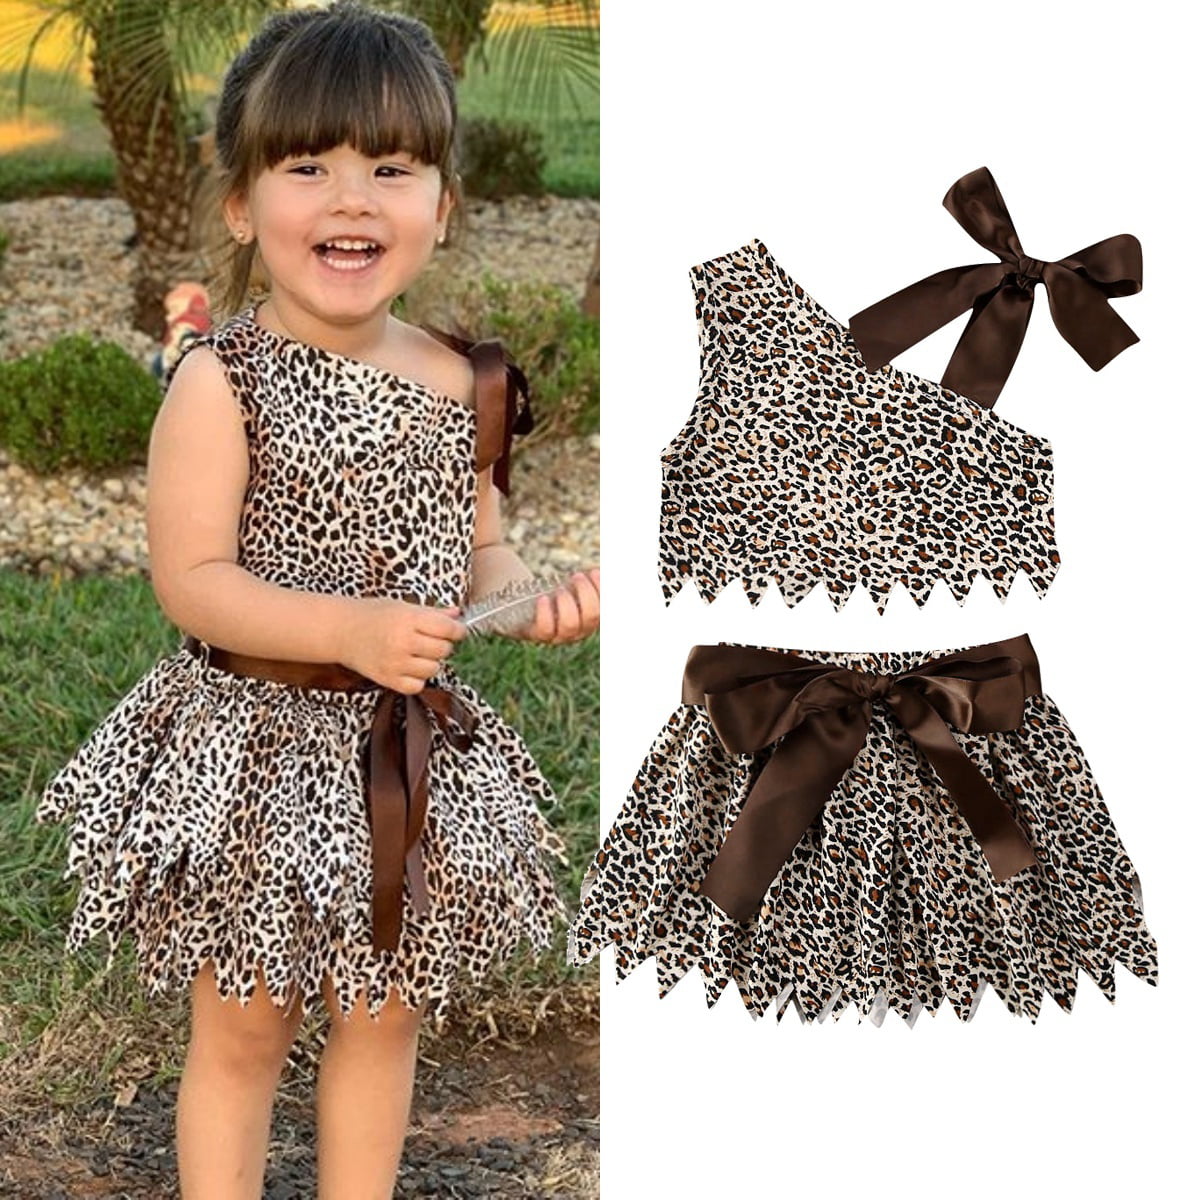 Corduroy Leopard Short Skirts Baby Clothes Set 2PCs Toddler Baby Girl Skirt Outfit Long Sleeve Elastic Band Tops